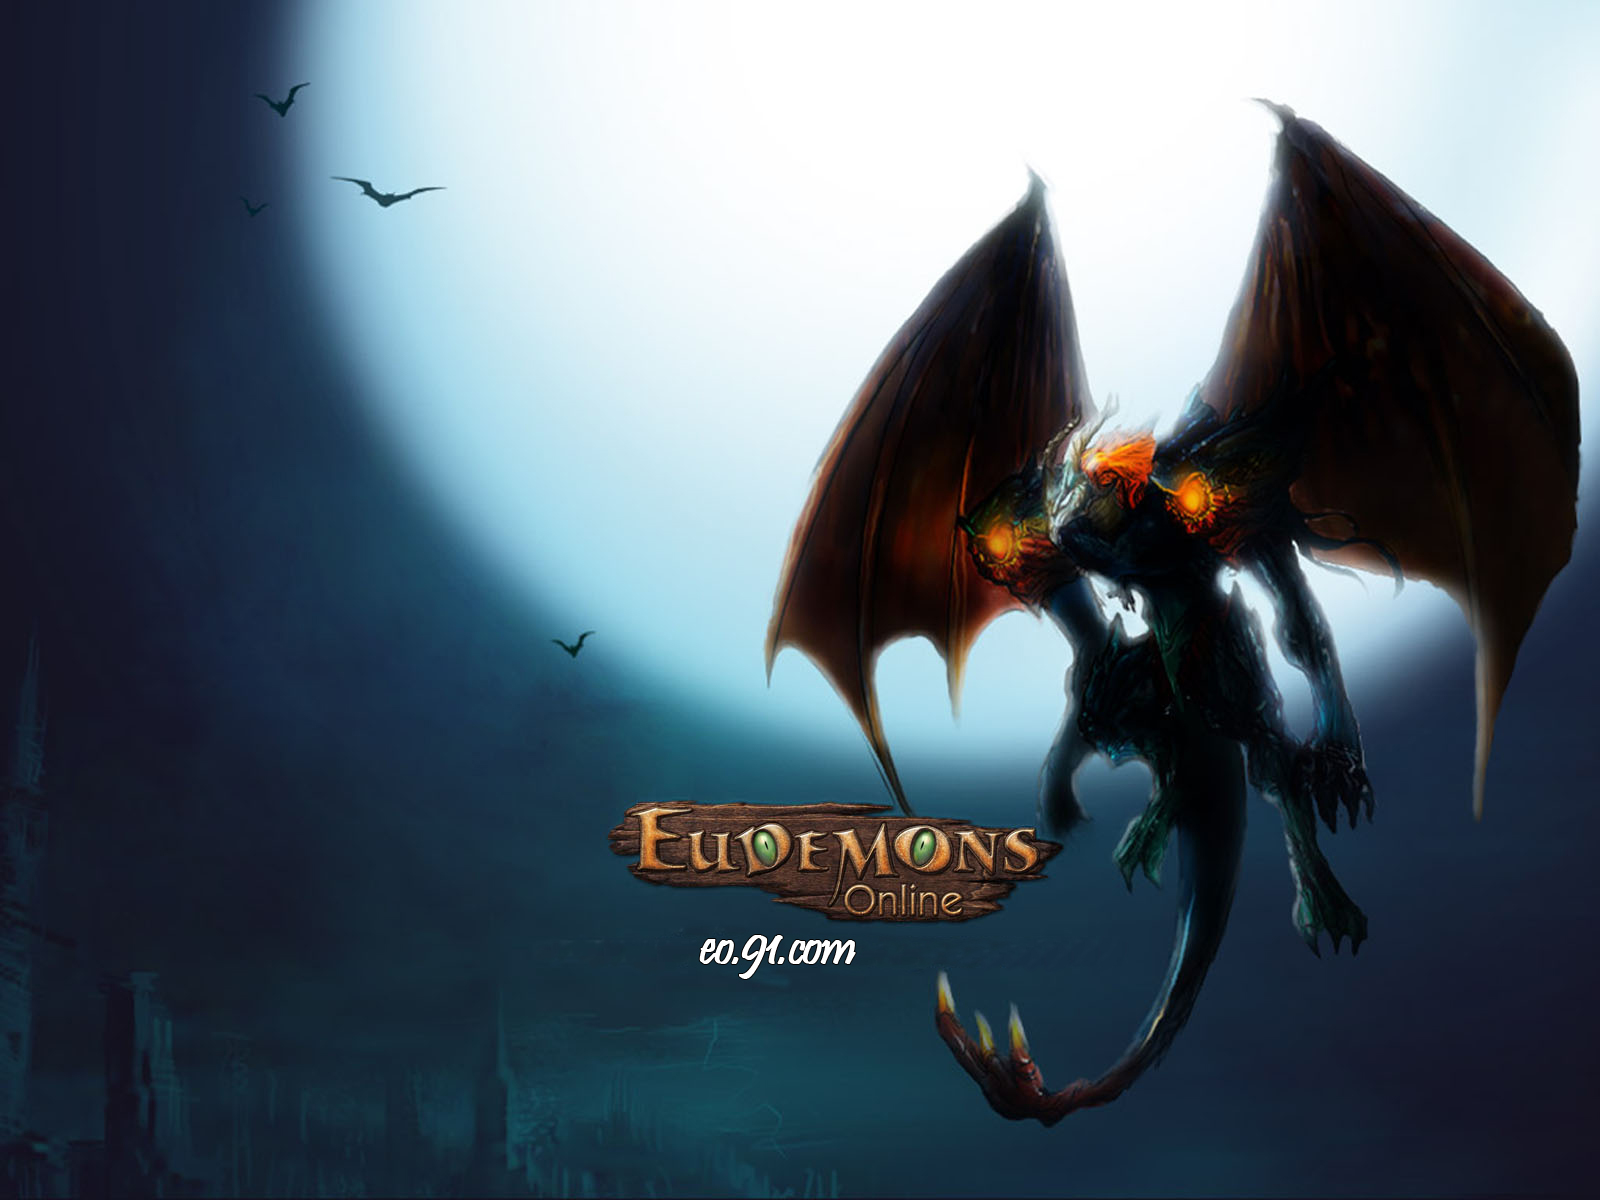 Video Game Eudemons Online 1600x1200